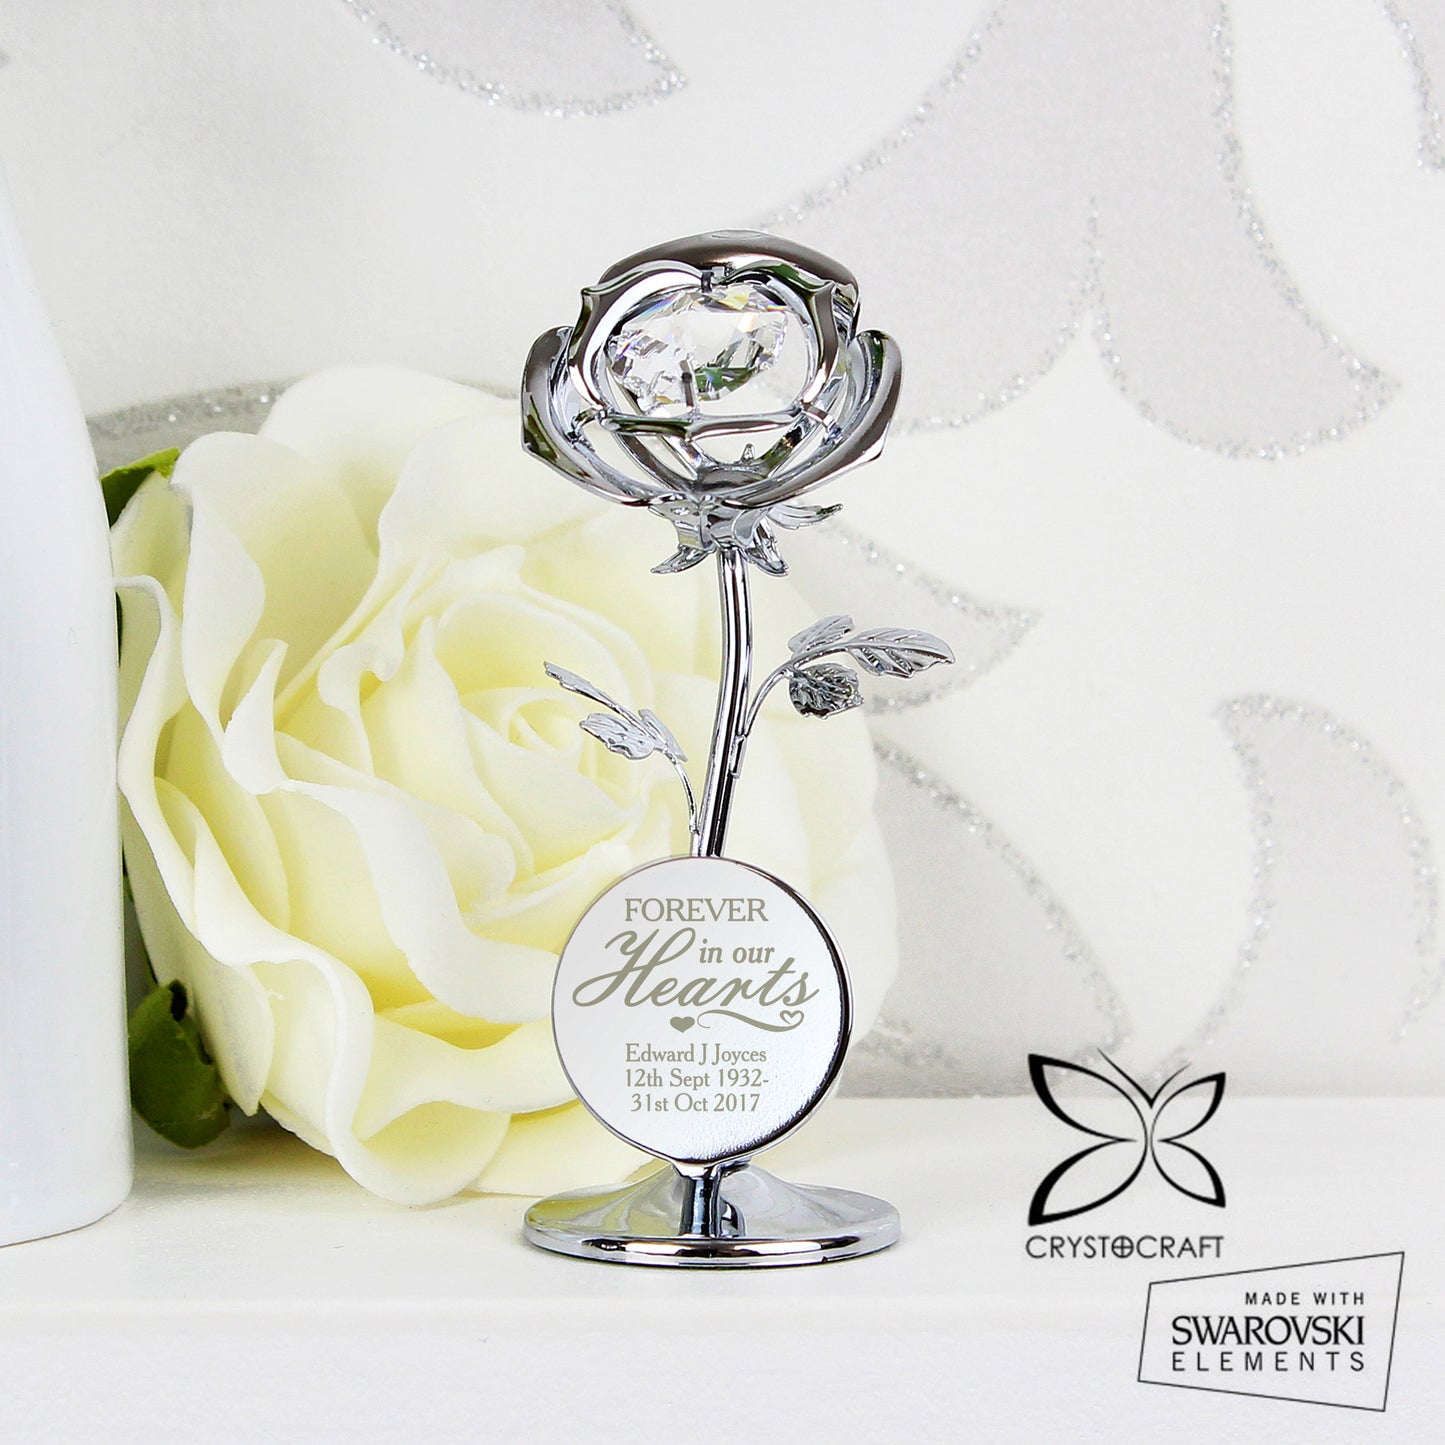 Personalised 'Forever in Our Hearts' Silver Plated Crystocraft Rose Ornament